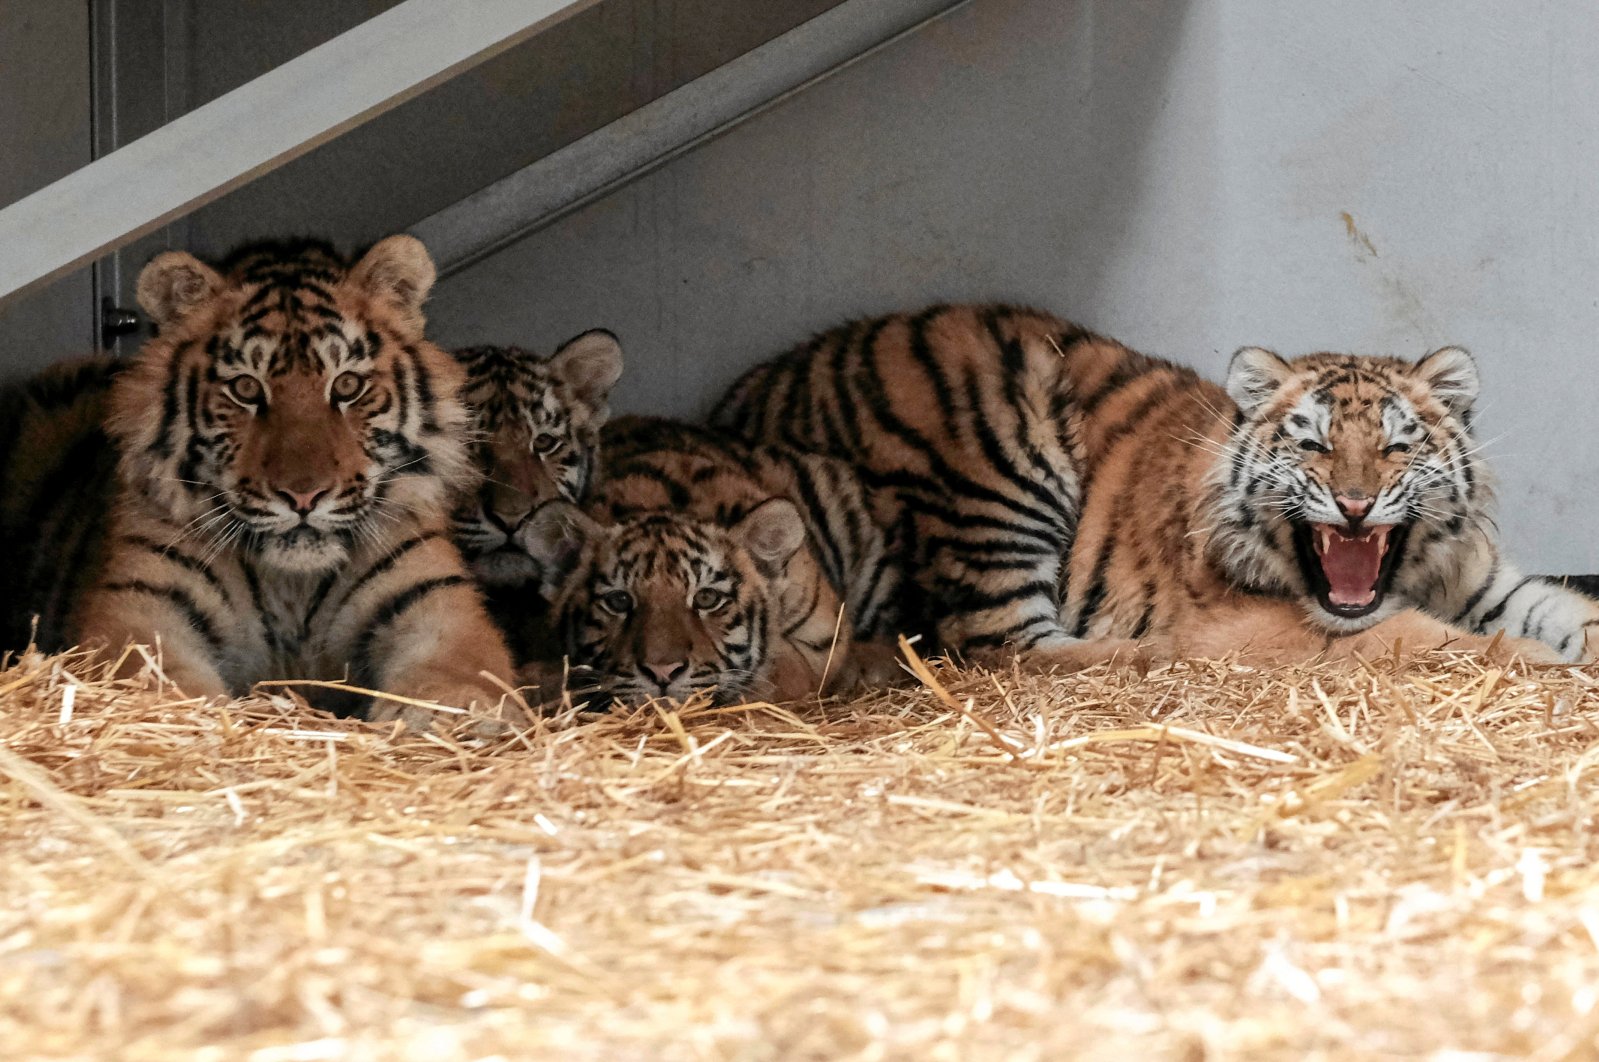 Tigers that were evacuated by Poznan Zoo employees from a sanctuary near Kyiv and taken to Poland are seen at Poznan Zoo in Poznan, Poland, March 4, 2022. (Reuters photo)